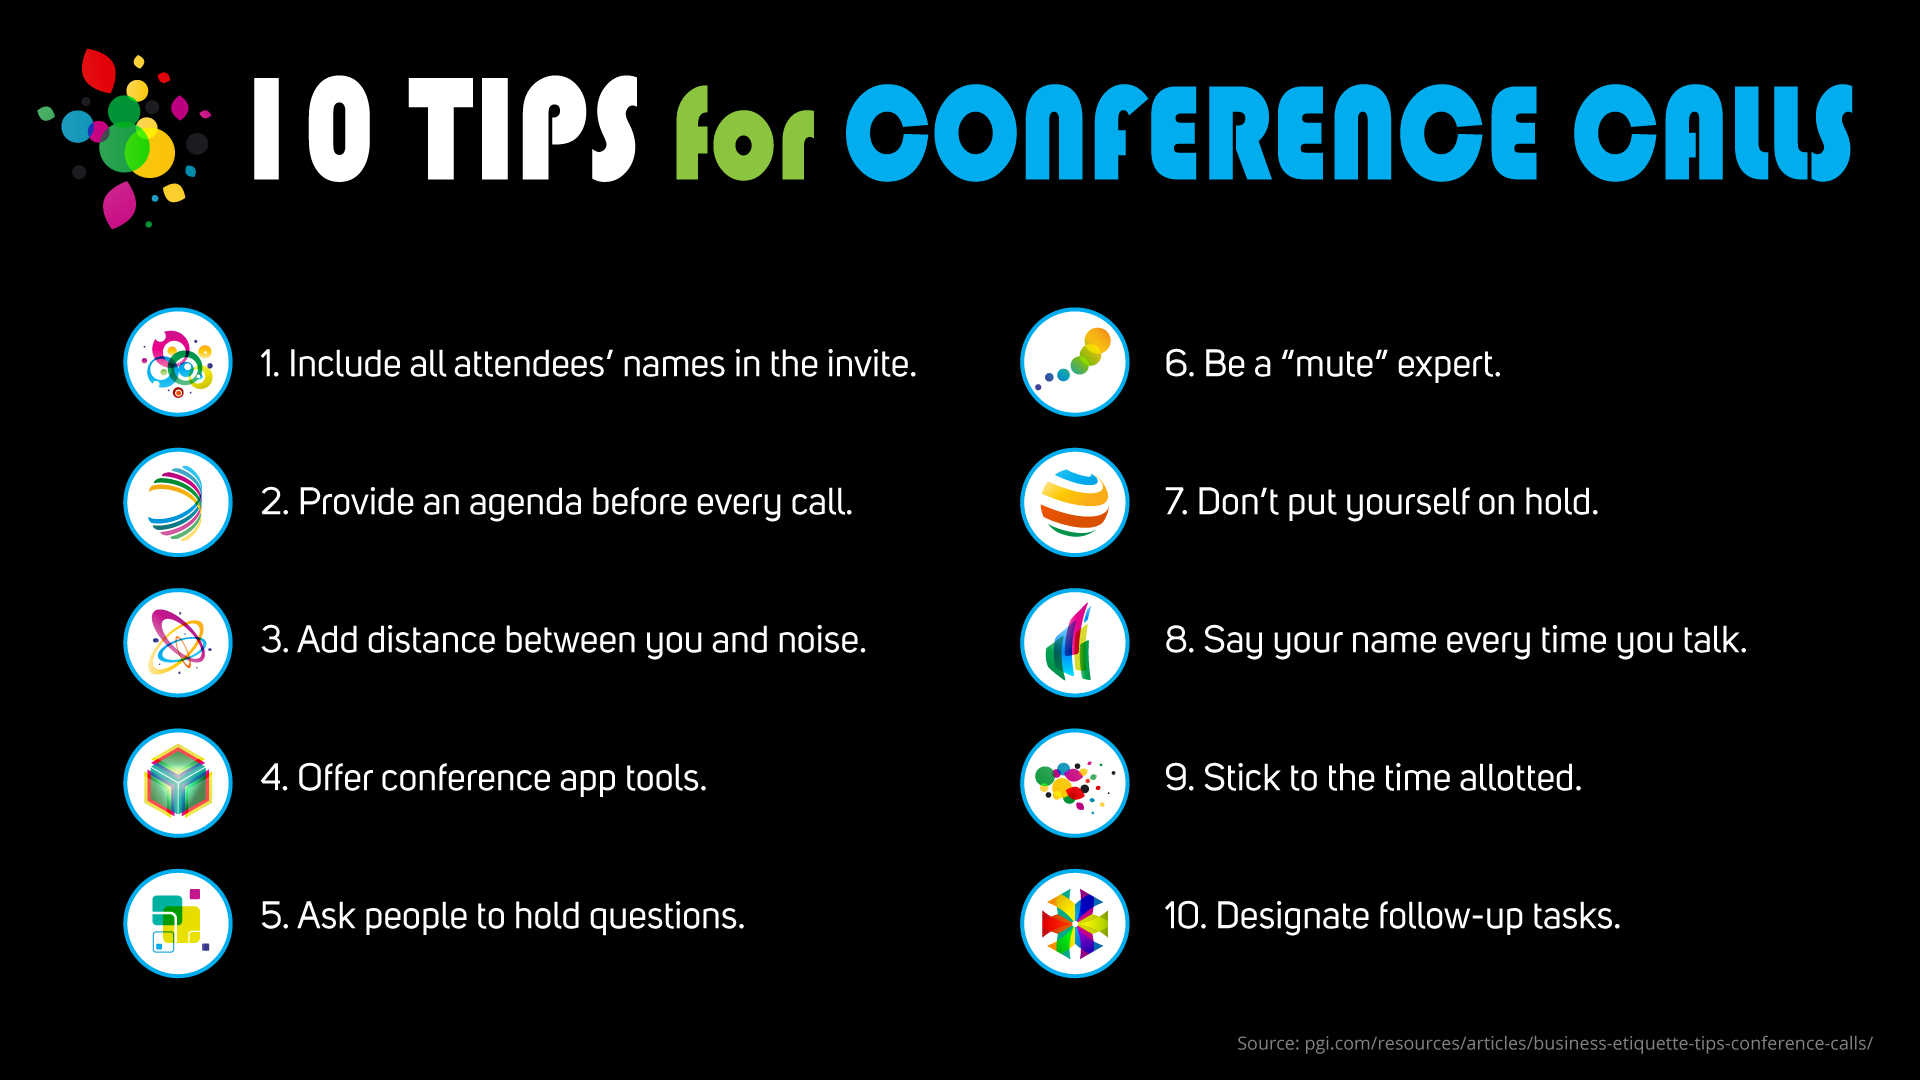 Free Graphic | Conference Call Tips | 10 Tips